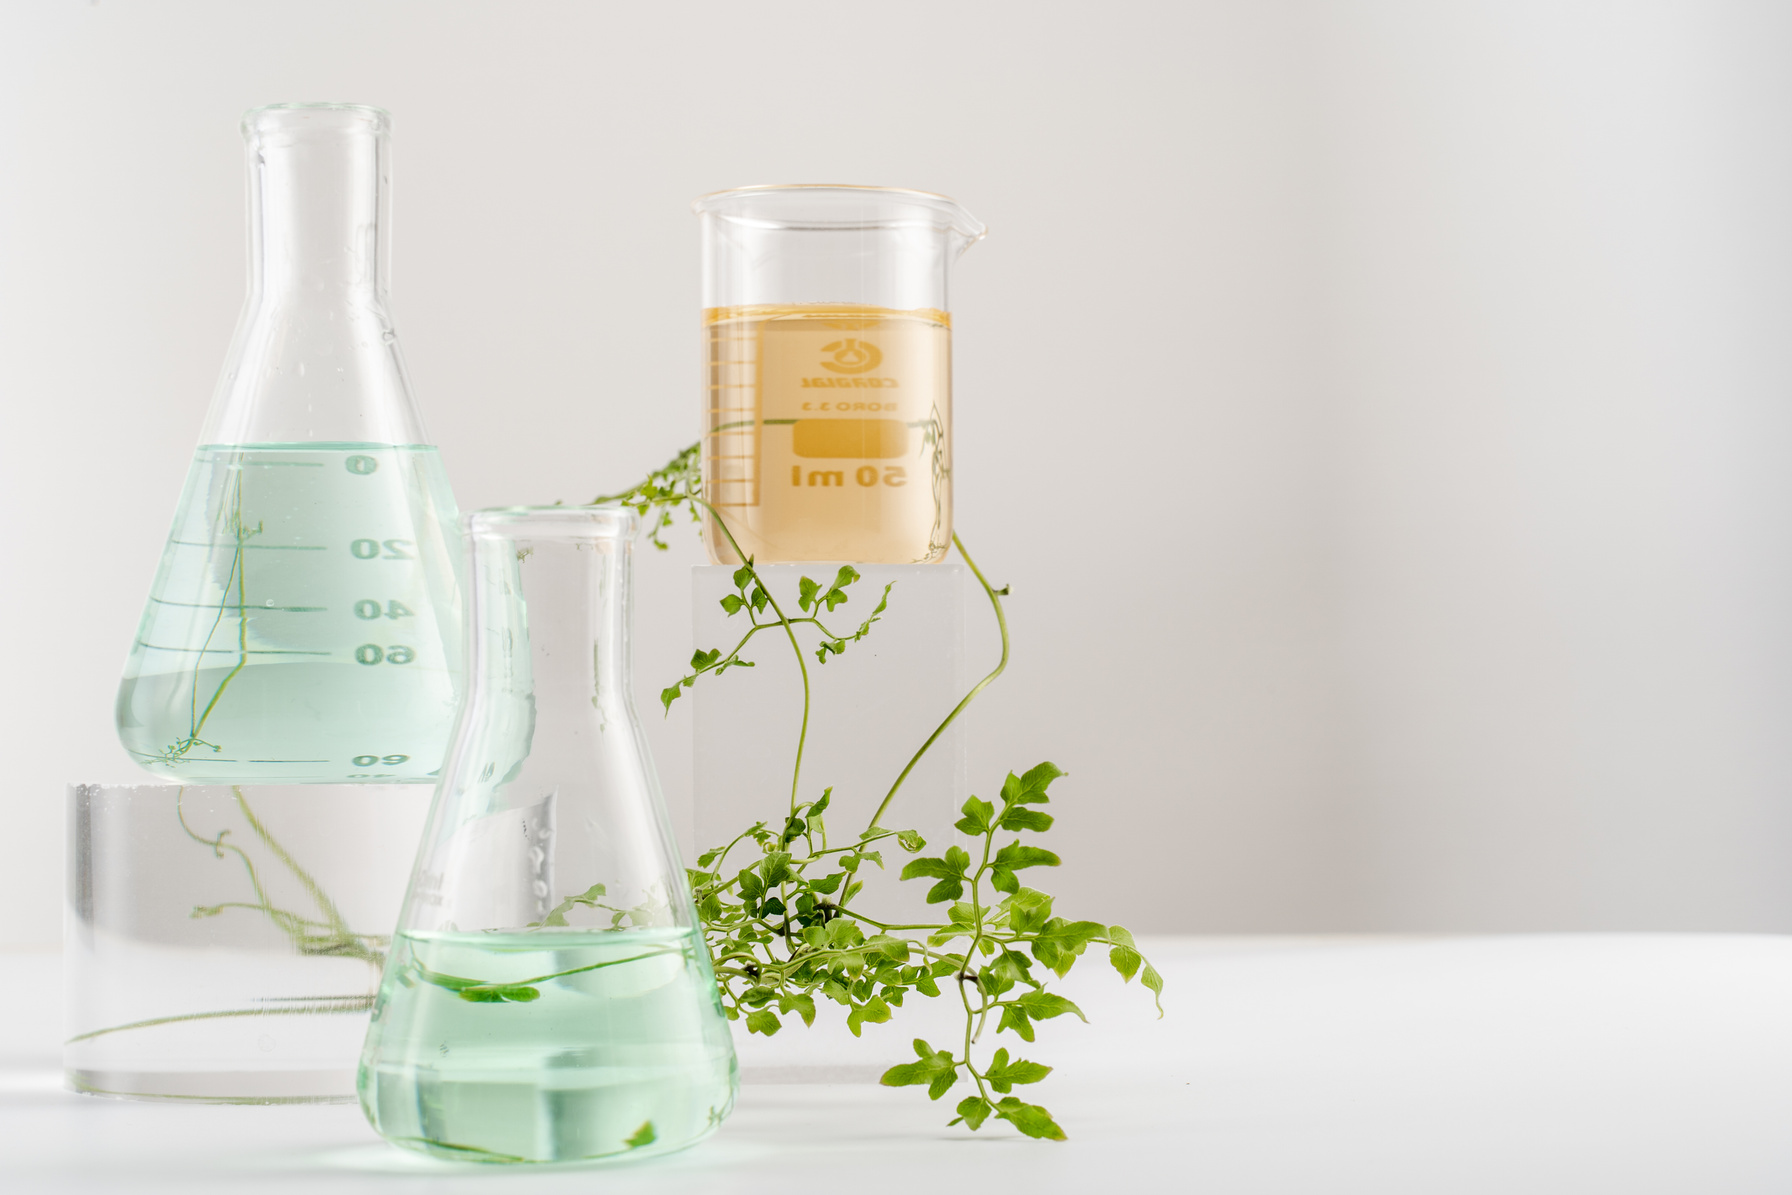 Beakers with Branches of Leaves